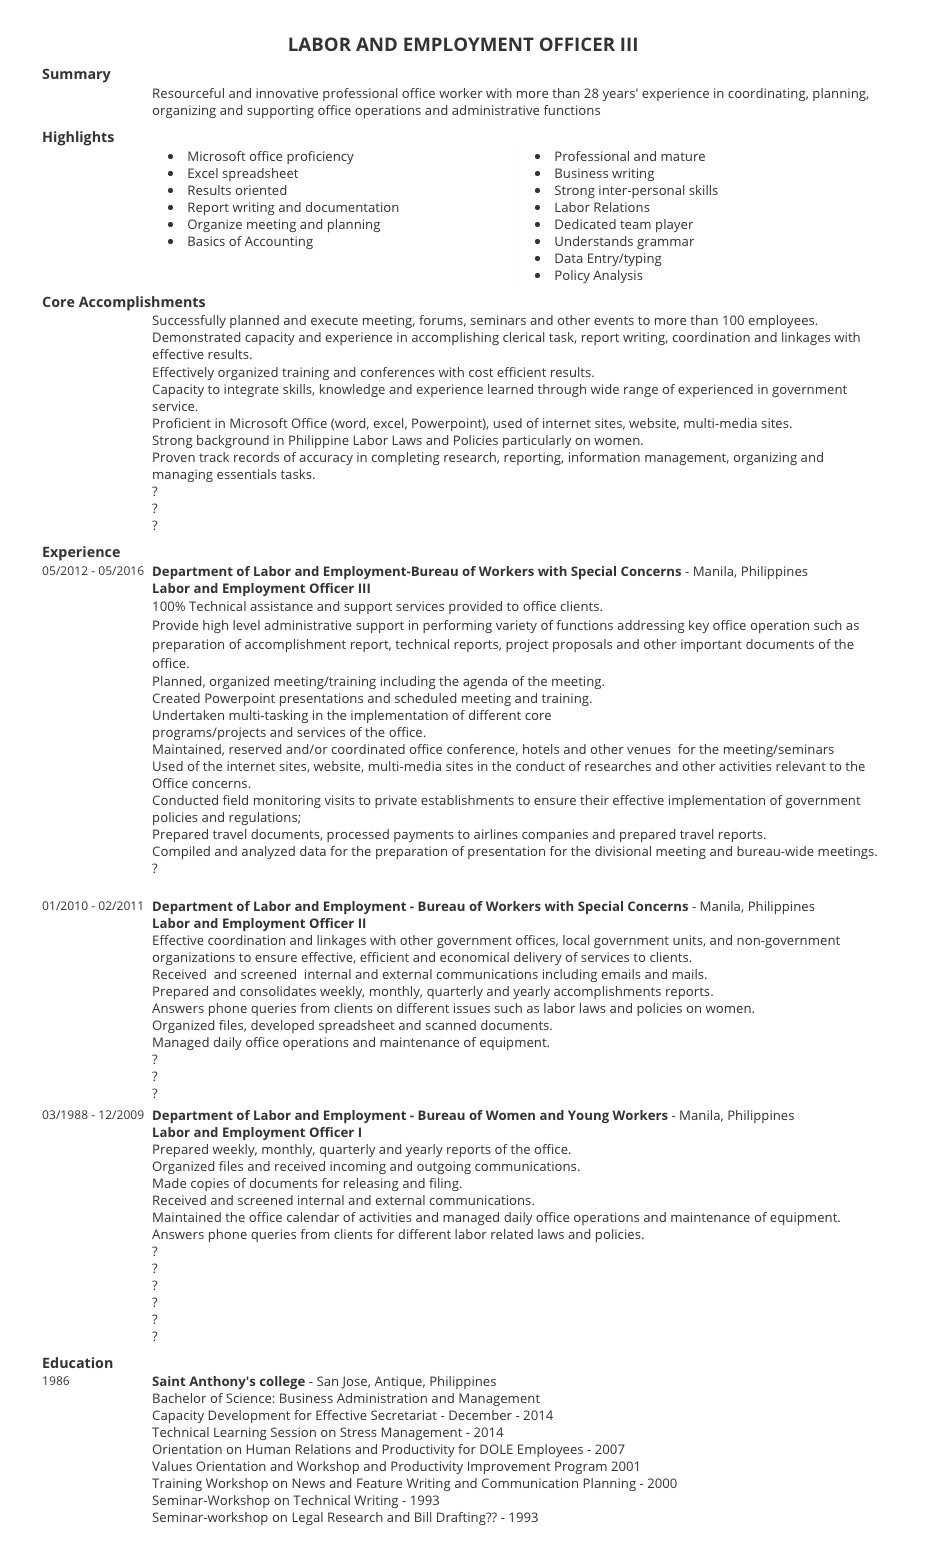 Sample Resume Objective Statement for Government Resume Samples for Government Job Application In the Philippines …